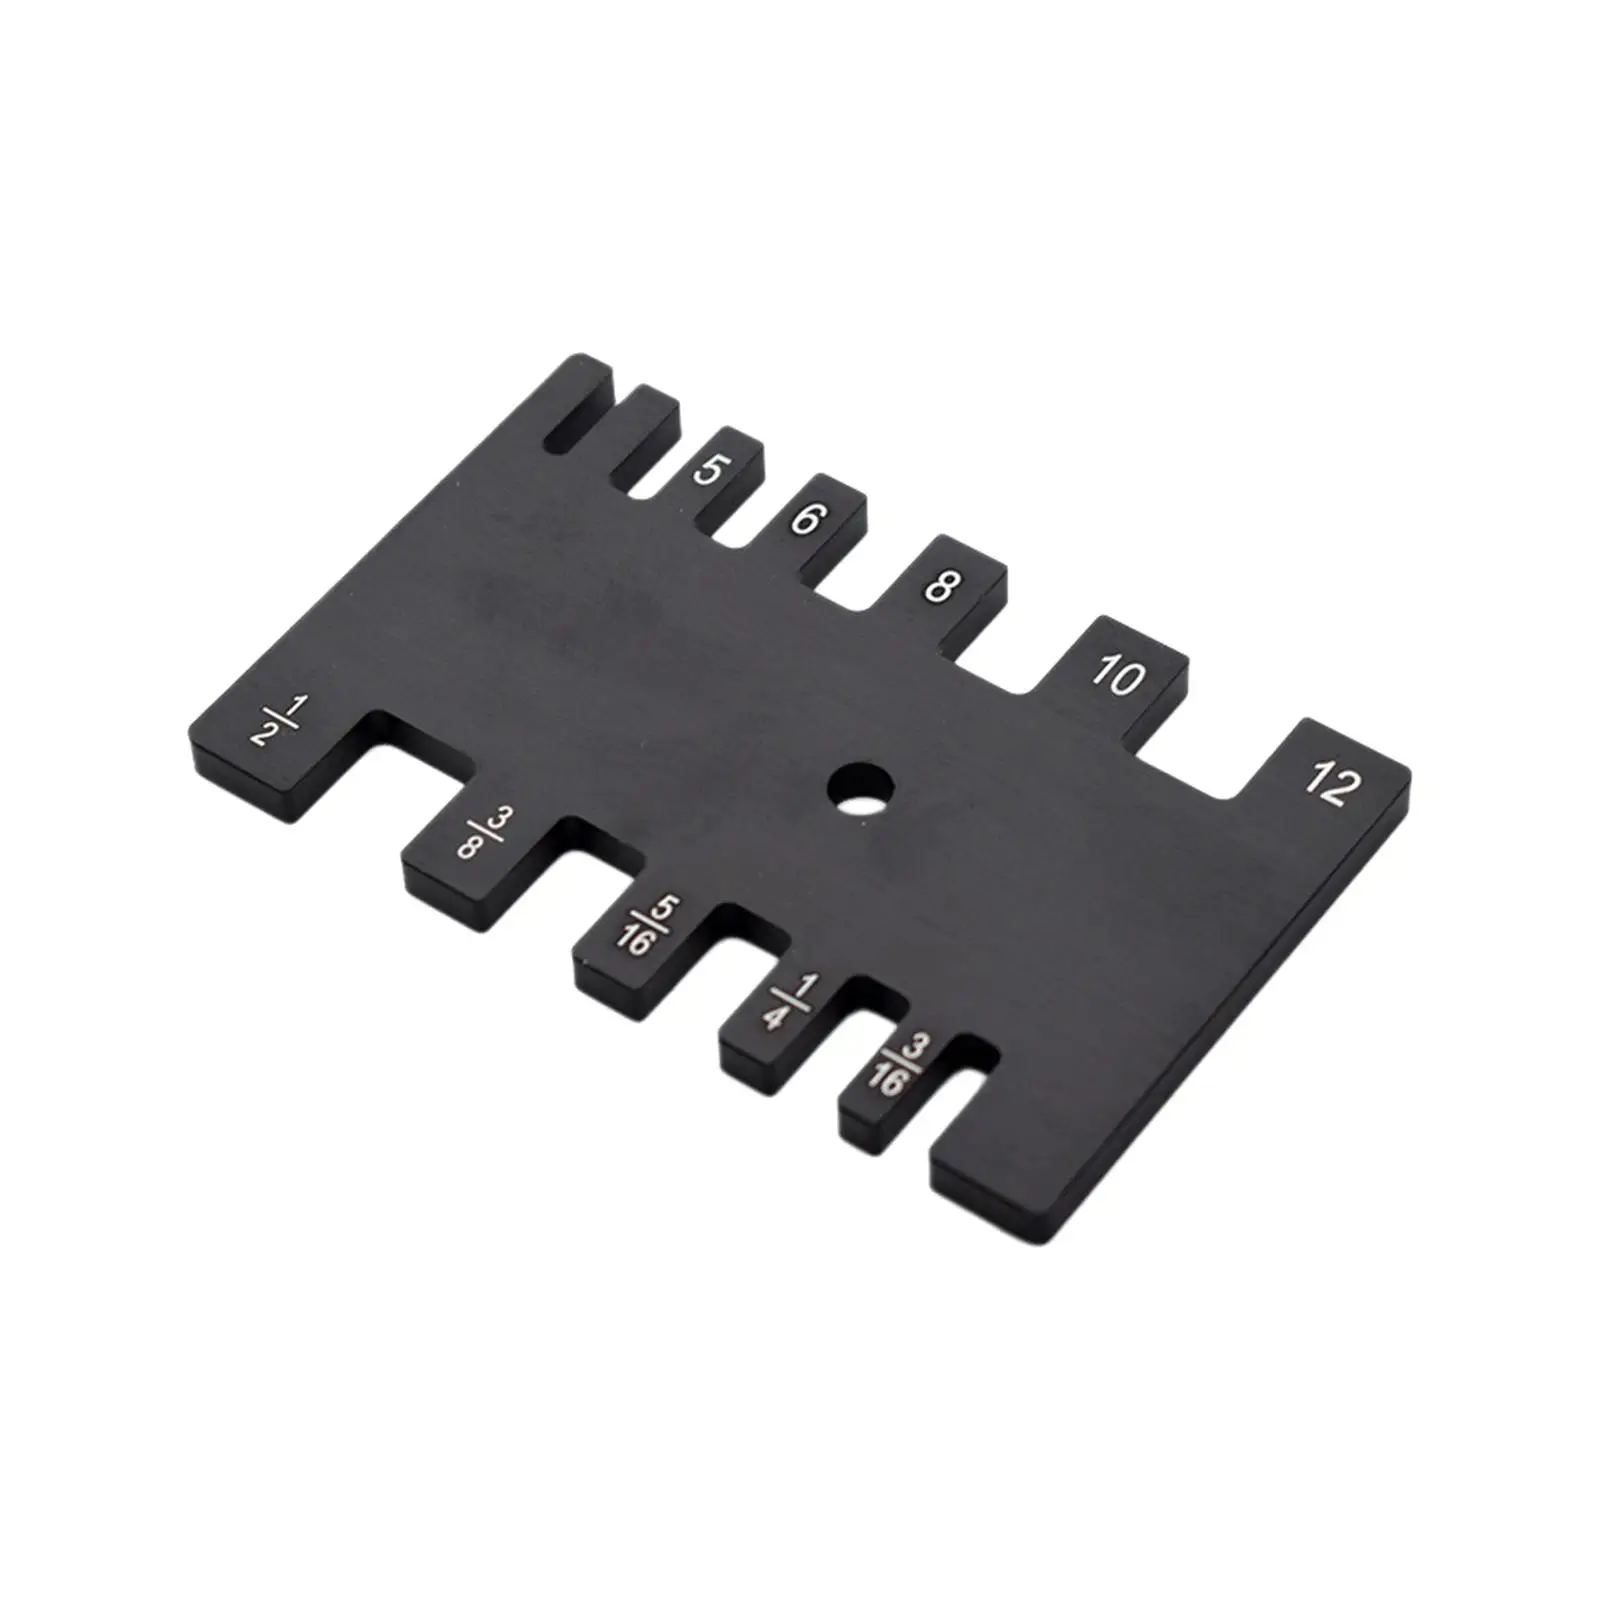 Aluminium Insert Plate Gauge Guide Durable Professional Trimmer Tools for Wood Trimmer